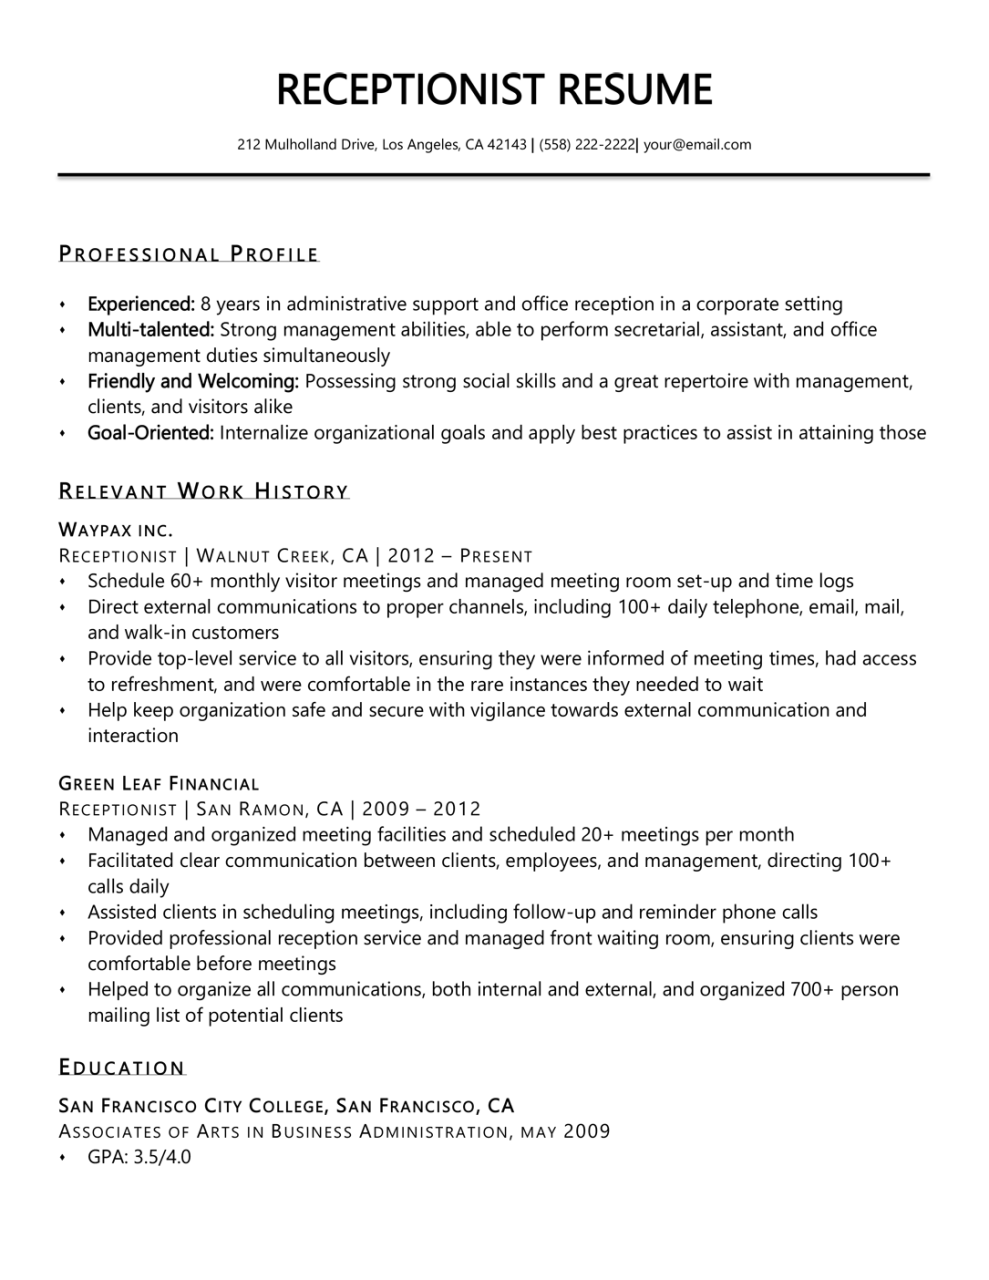 How To Write The Education Section Of A Resume